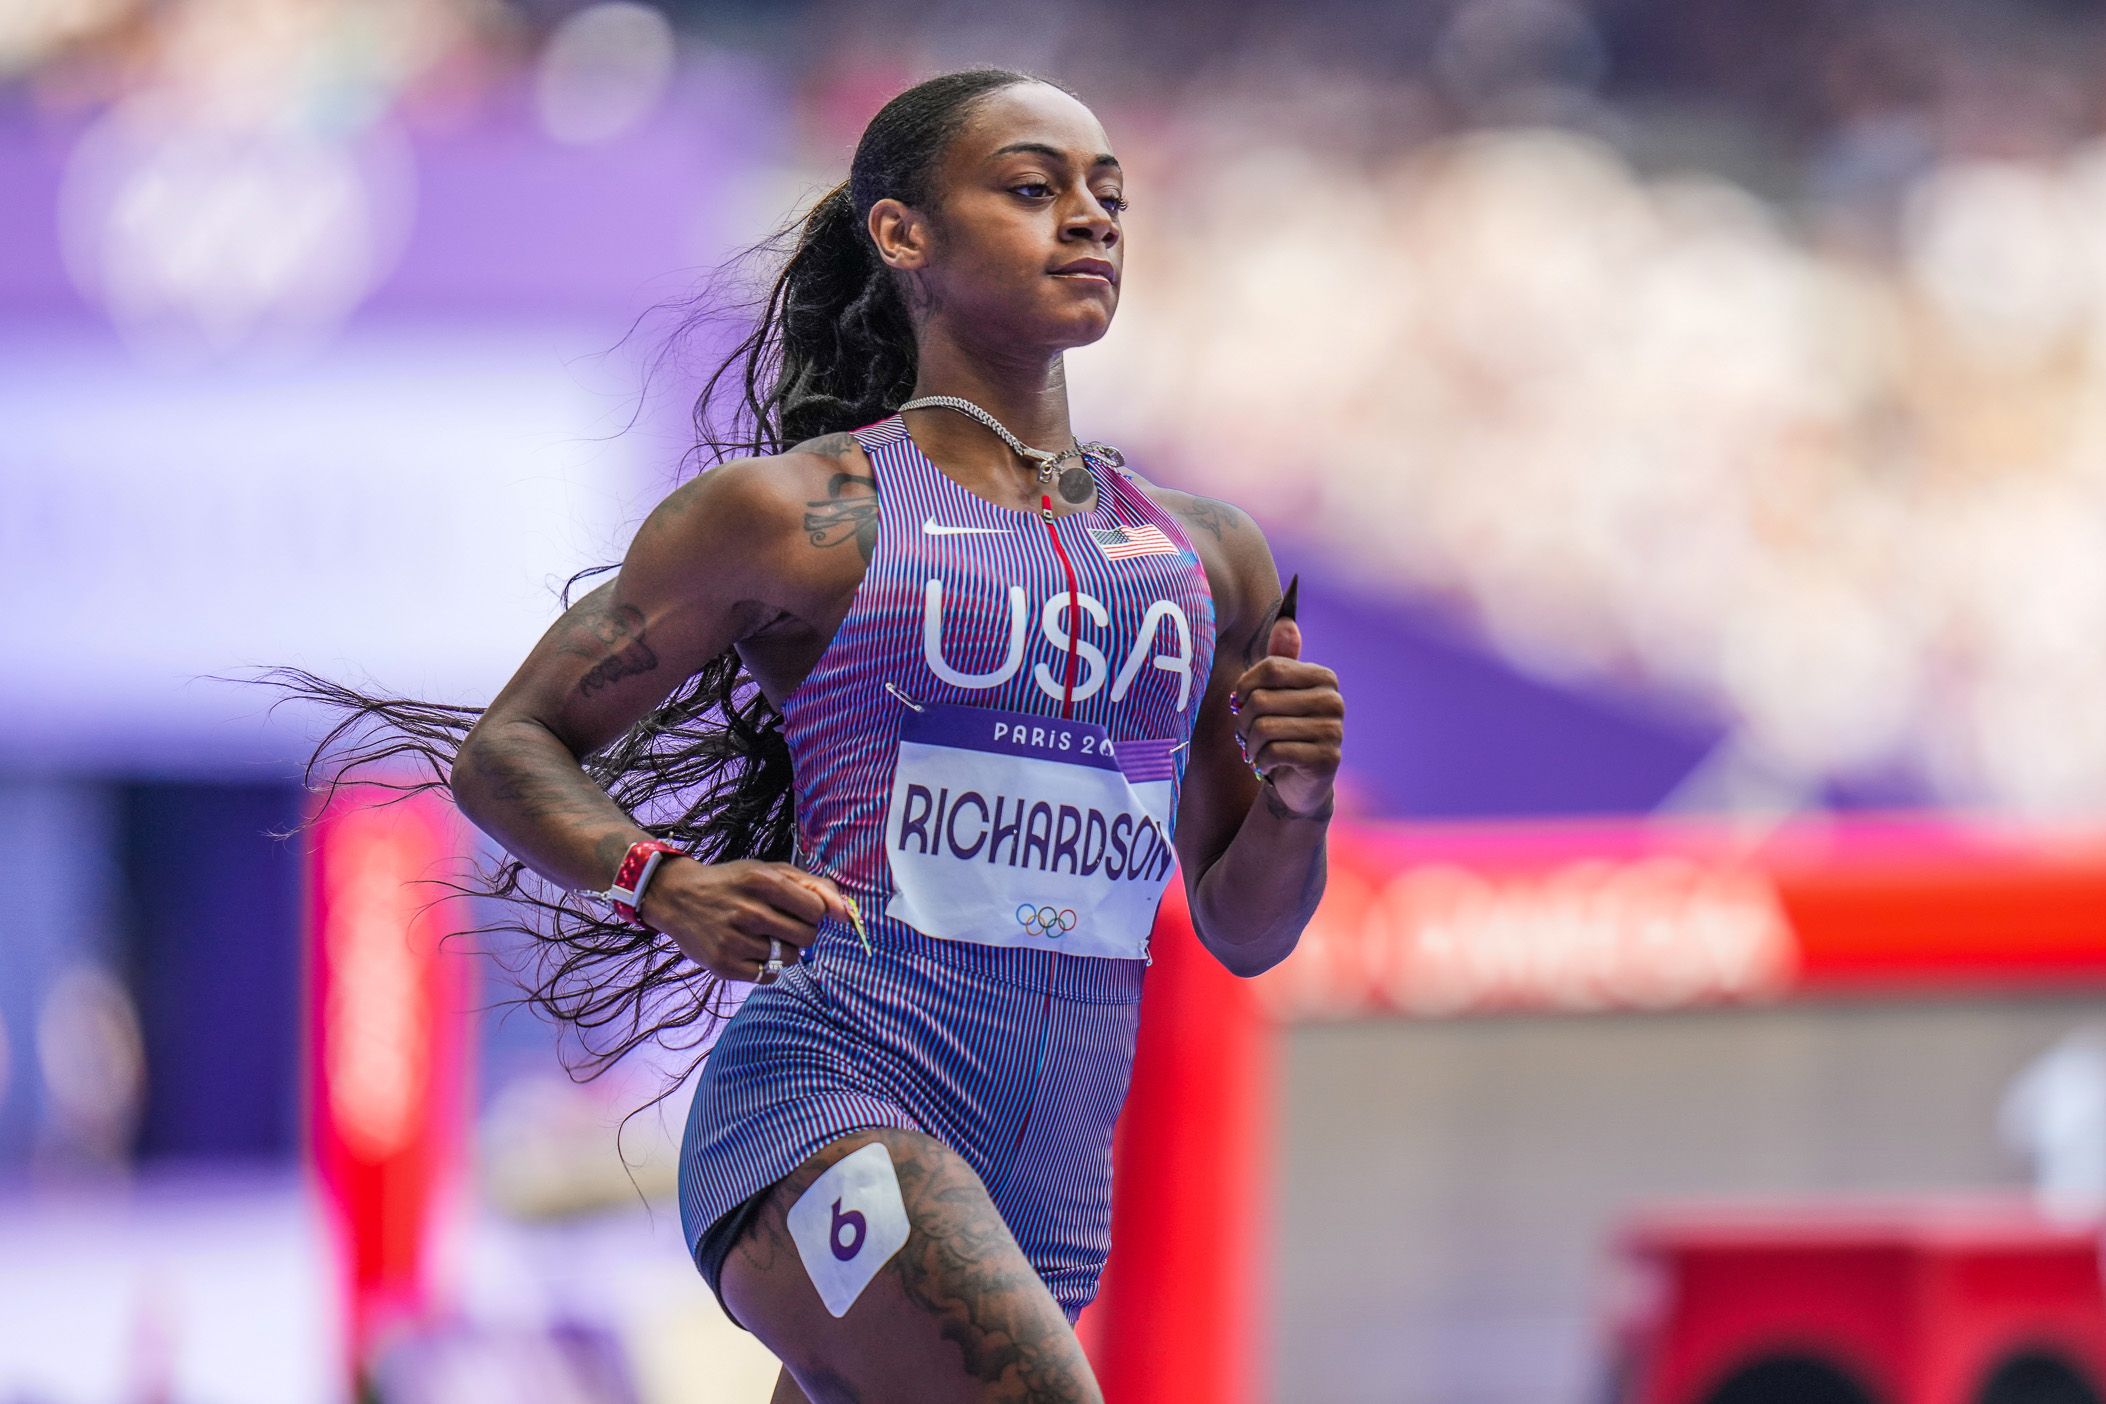 Sha'Carri Richardson in the 100m at the Paris 2024 Olympic Games